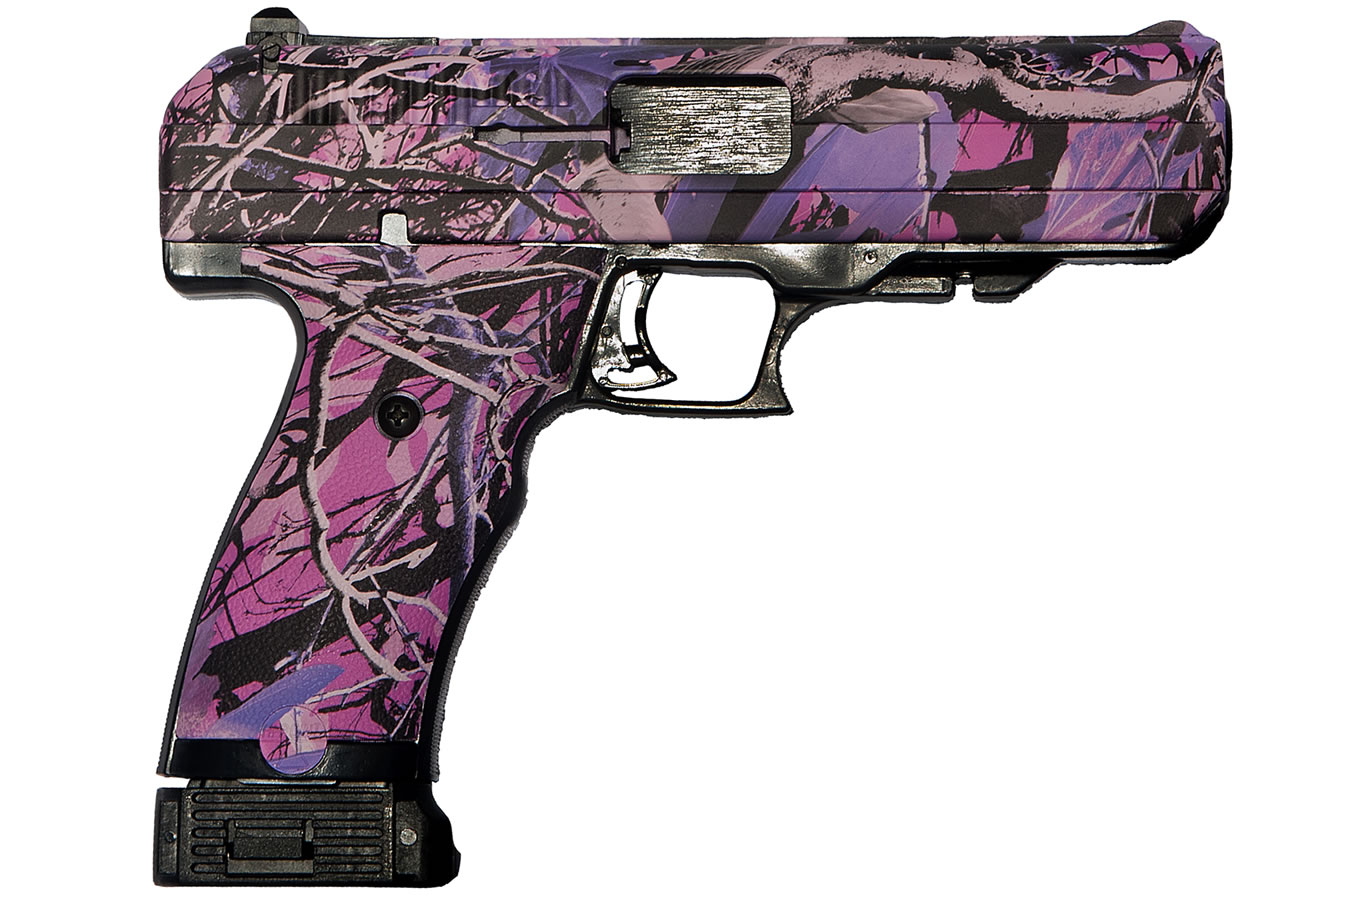 Pink Guns For Sale - The Best Pink Options